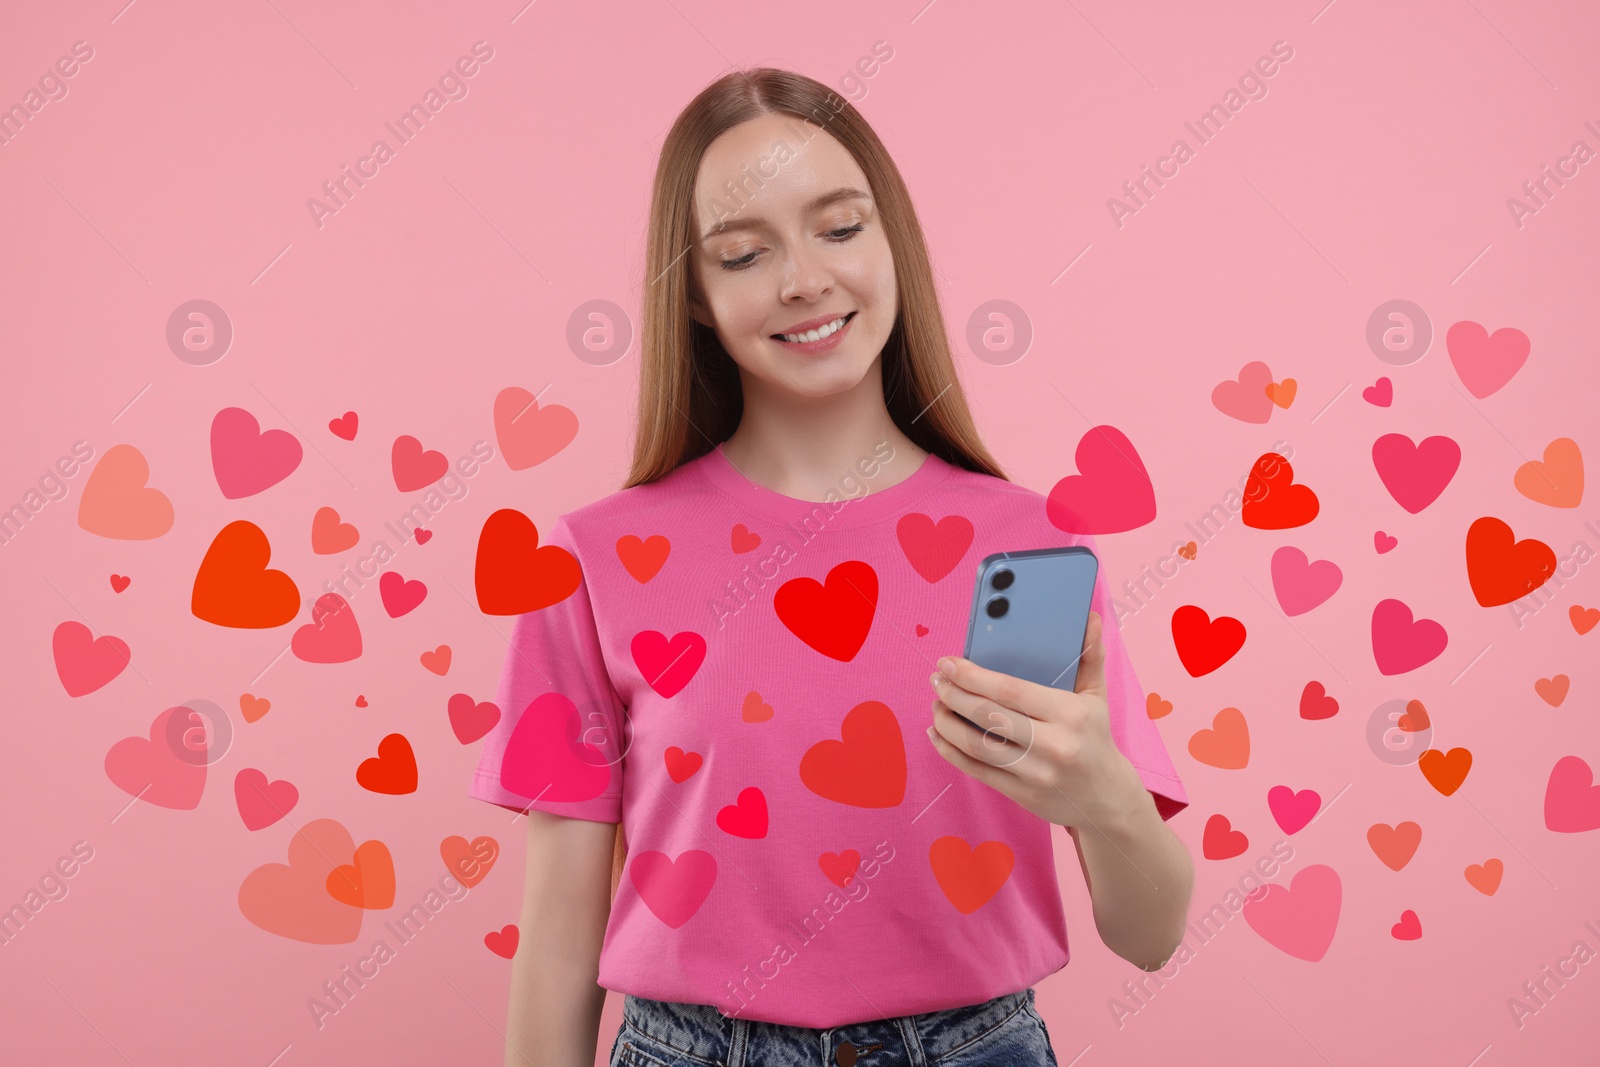 Image of Long distance love. Woman chatting with sweetheart via smartphone on pink background. Hearts flying out of device and swirling around her